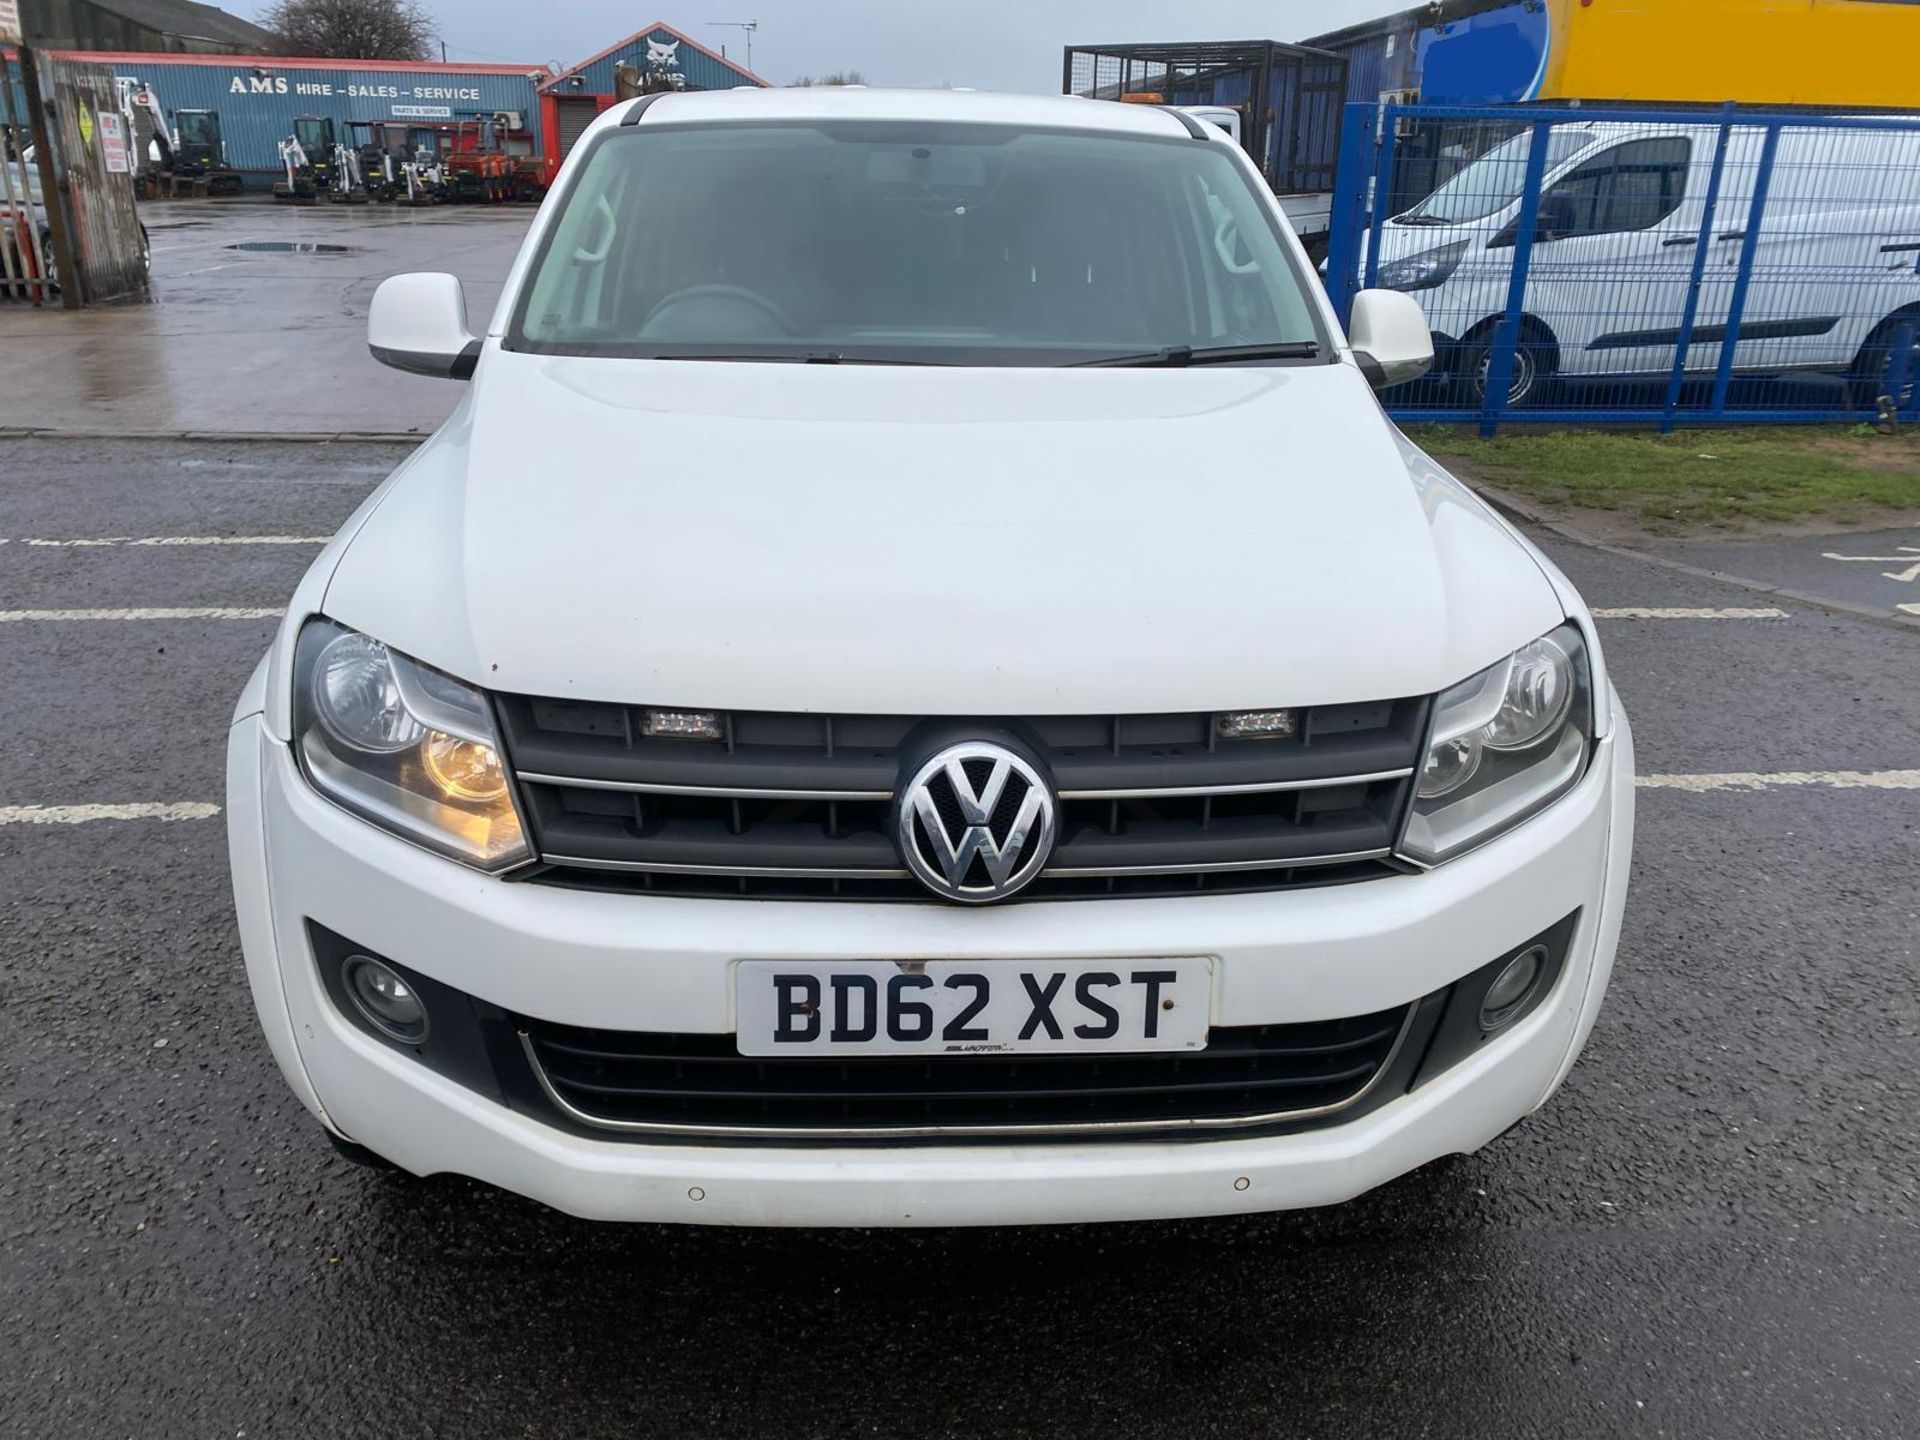 2012 62 VOLKSWAGEN AMOROK PICK UP - 68K MILES - 4X4 - AIR CON - LEATHER SEATS. - Image 14 of 14